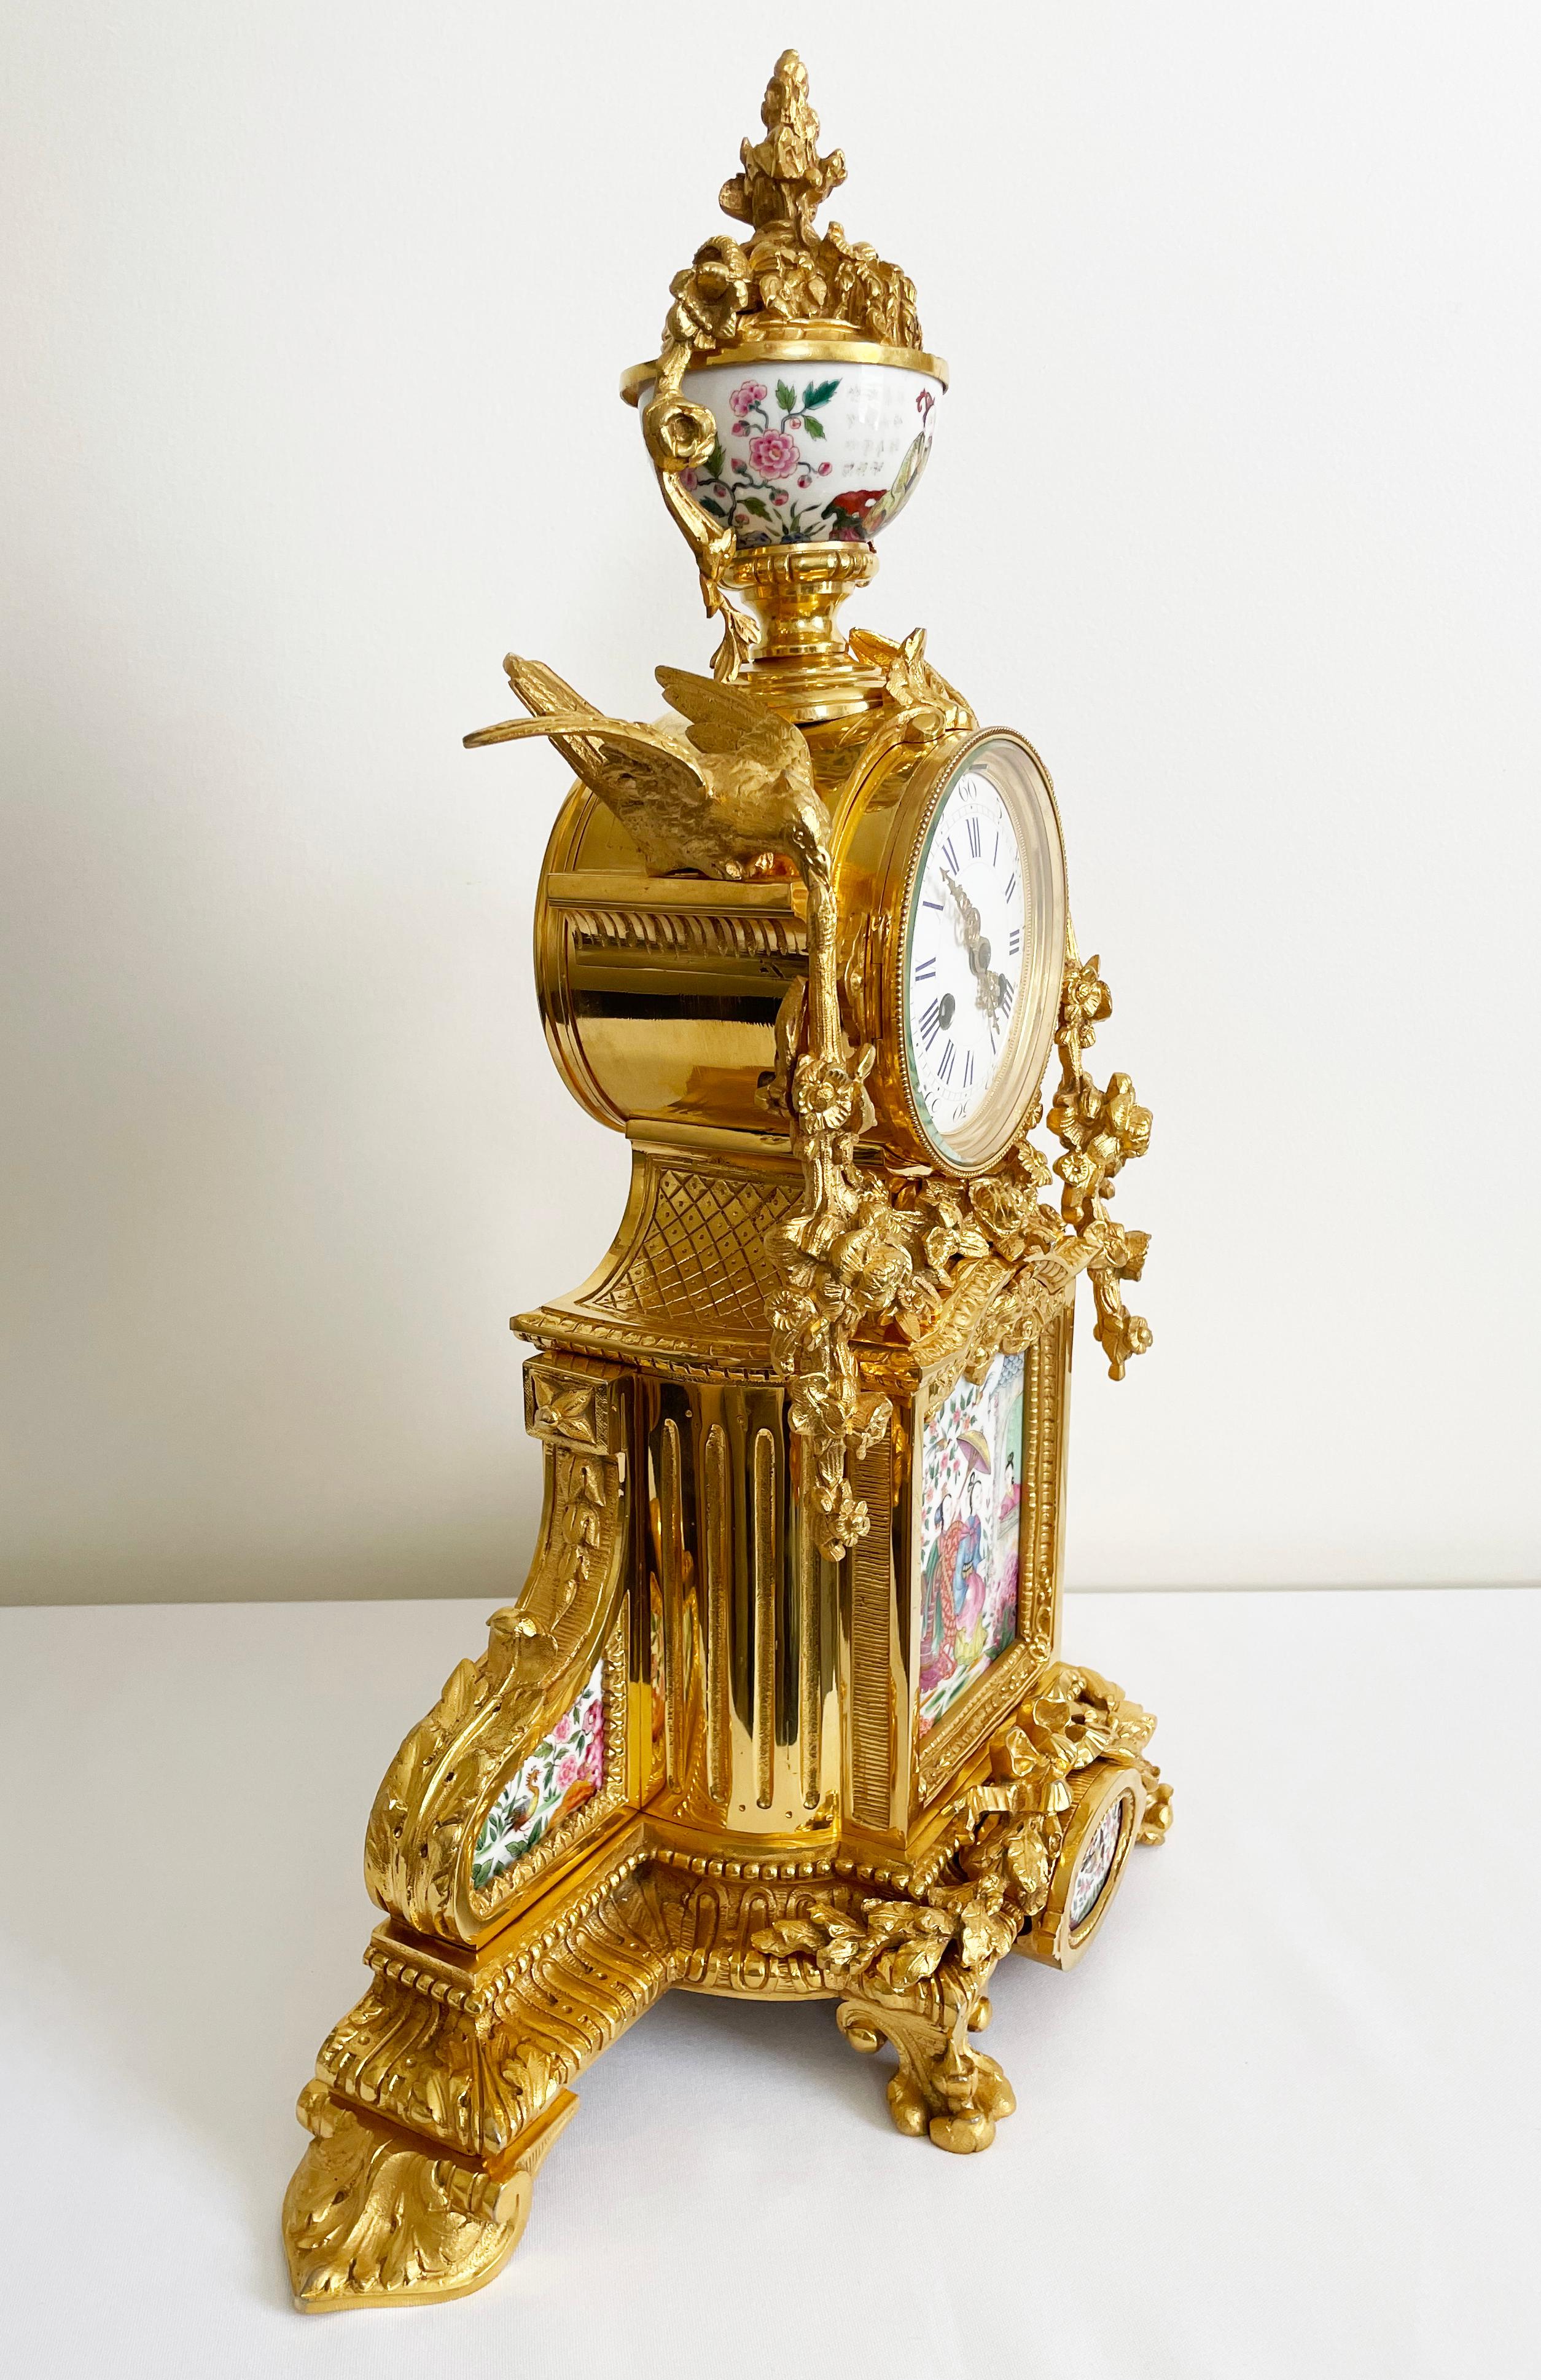 French Gilt Bronze And Porcelain Chinoiserie Themed Mantel Clock, 19th Century For Sale 12